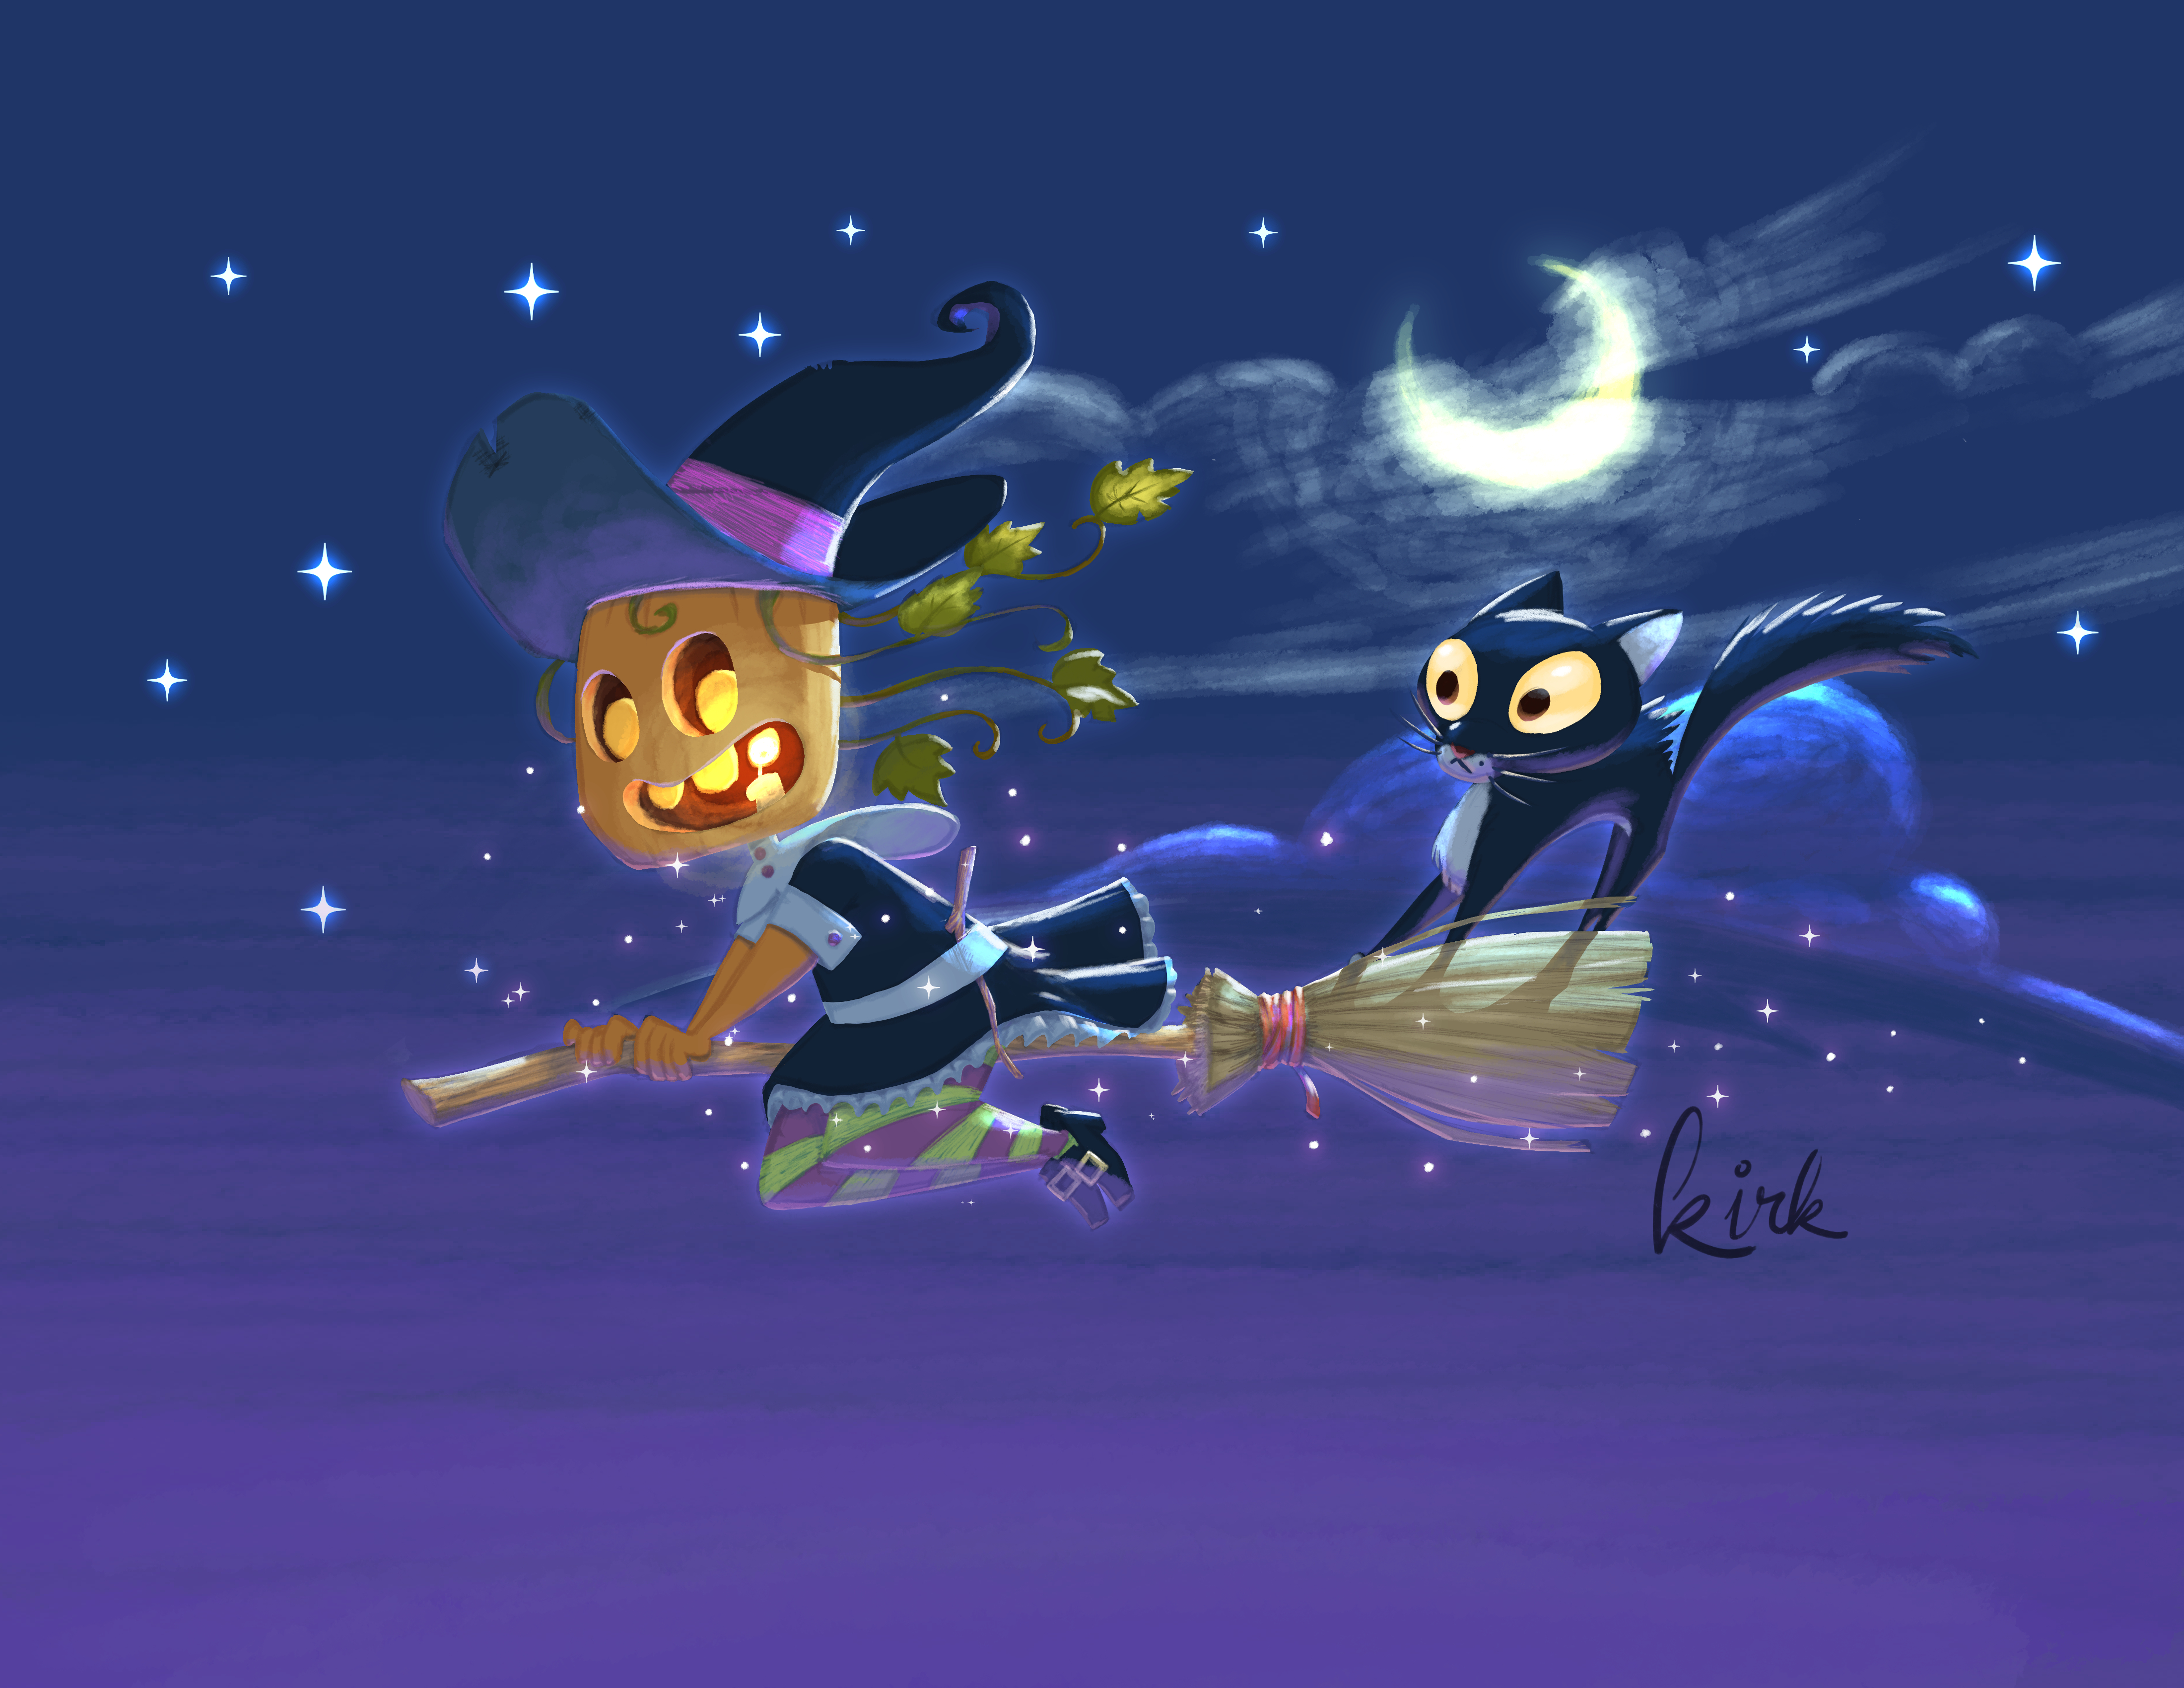 Professional Illustration for Children's Books, Games, and Education - Witch Pumpkin